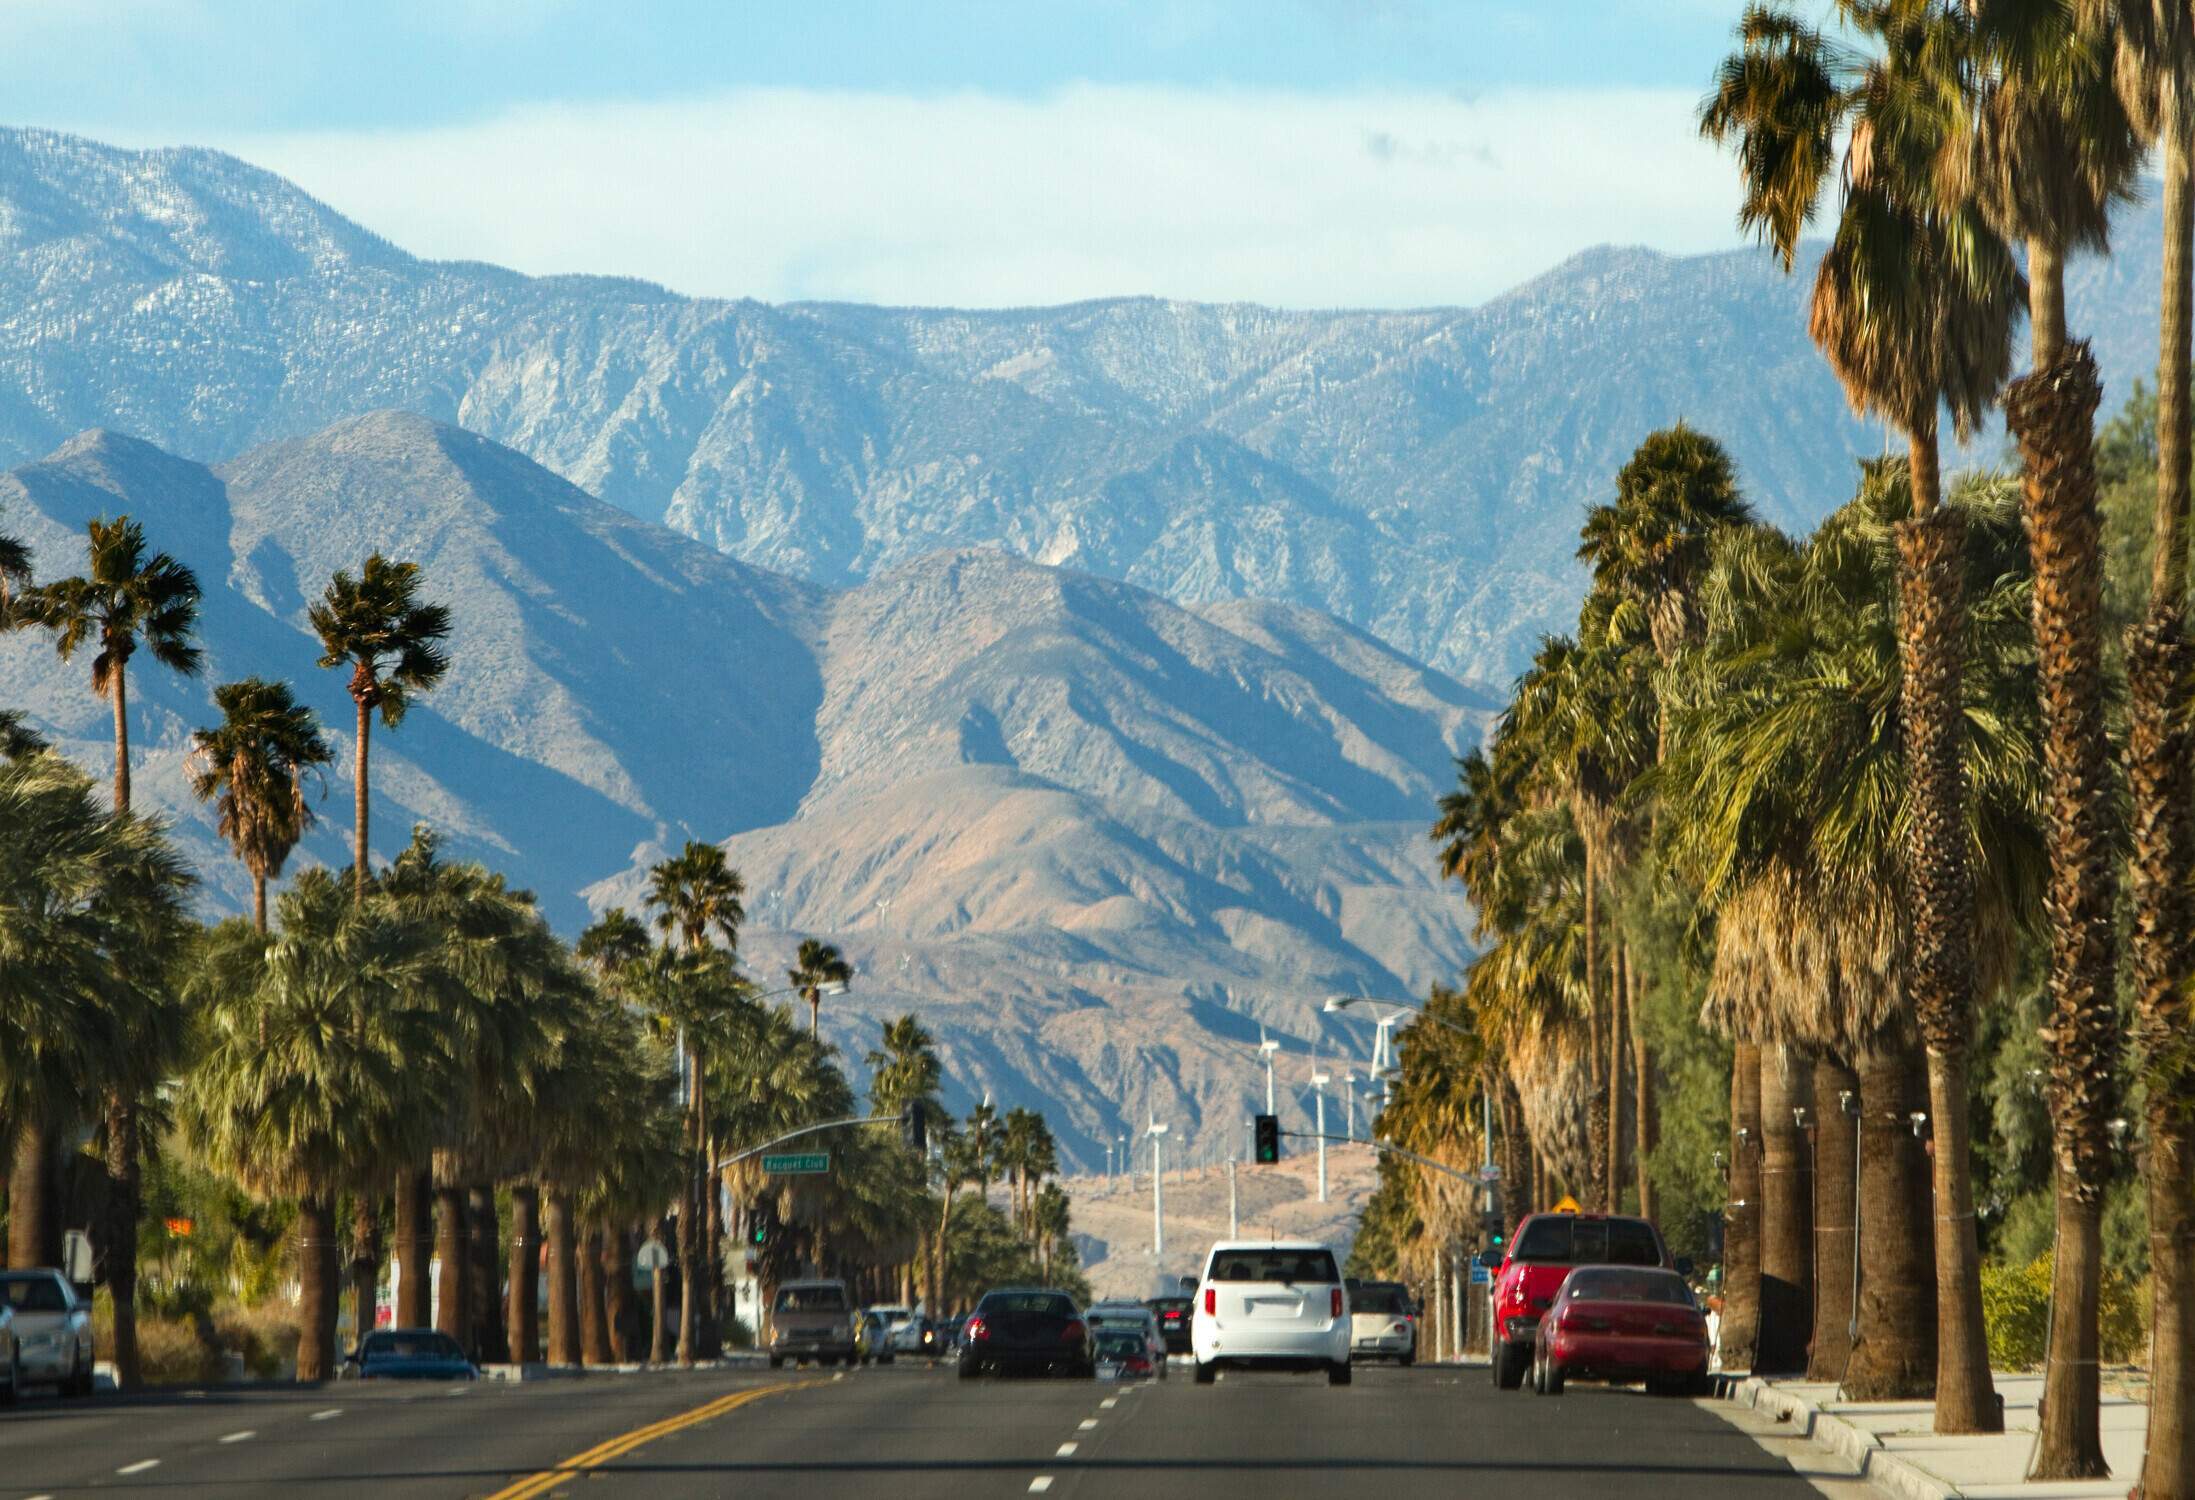 A scenic road, bustling with cars, is adorned with palm-lined sidewalks, while a majestic mountain range looms in the distance.